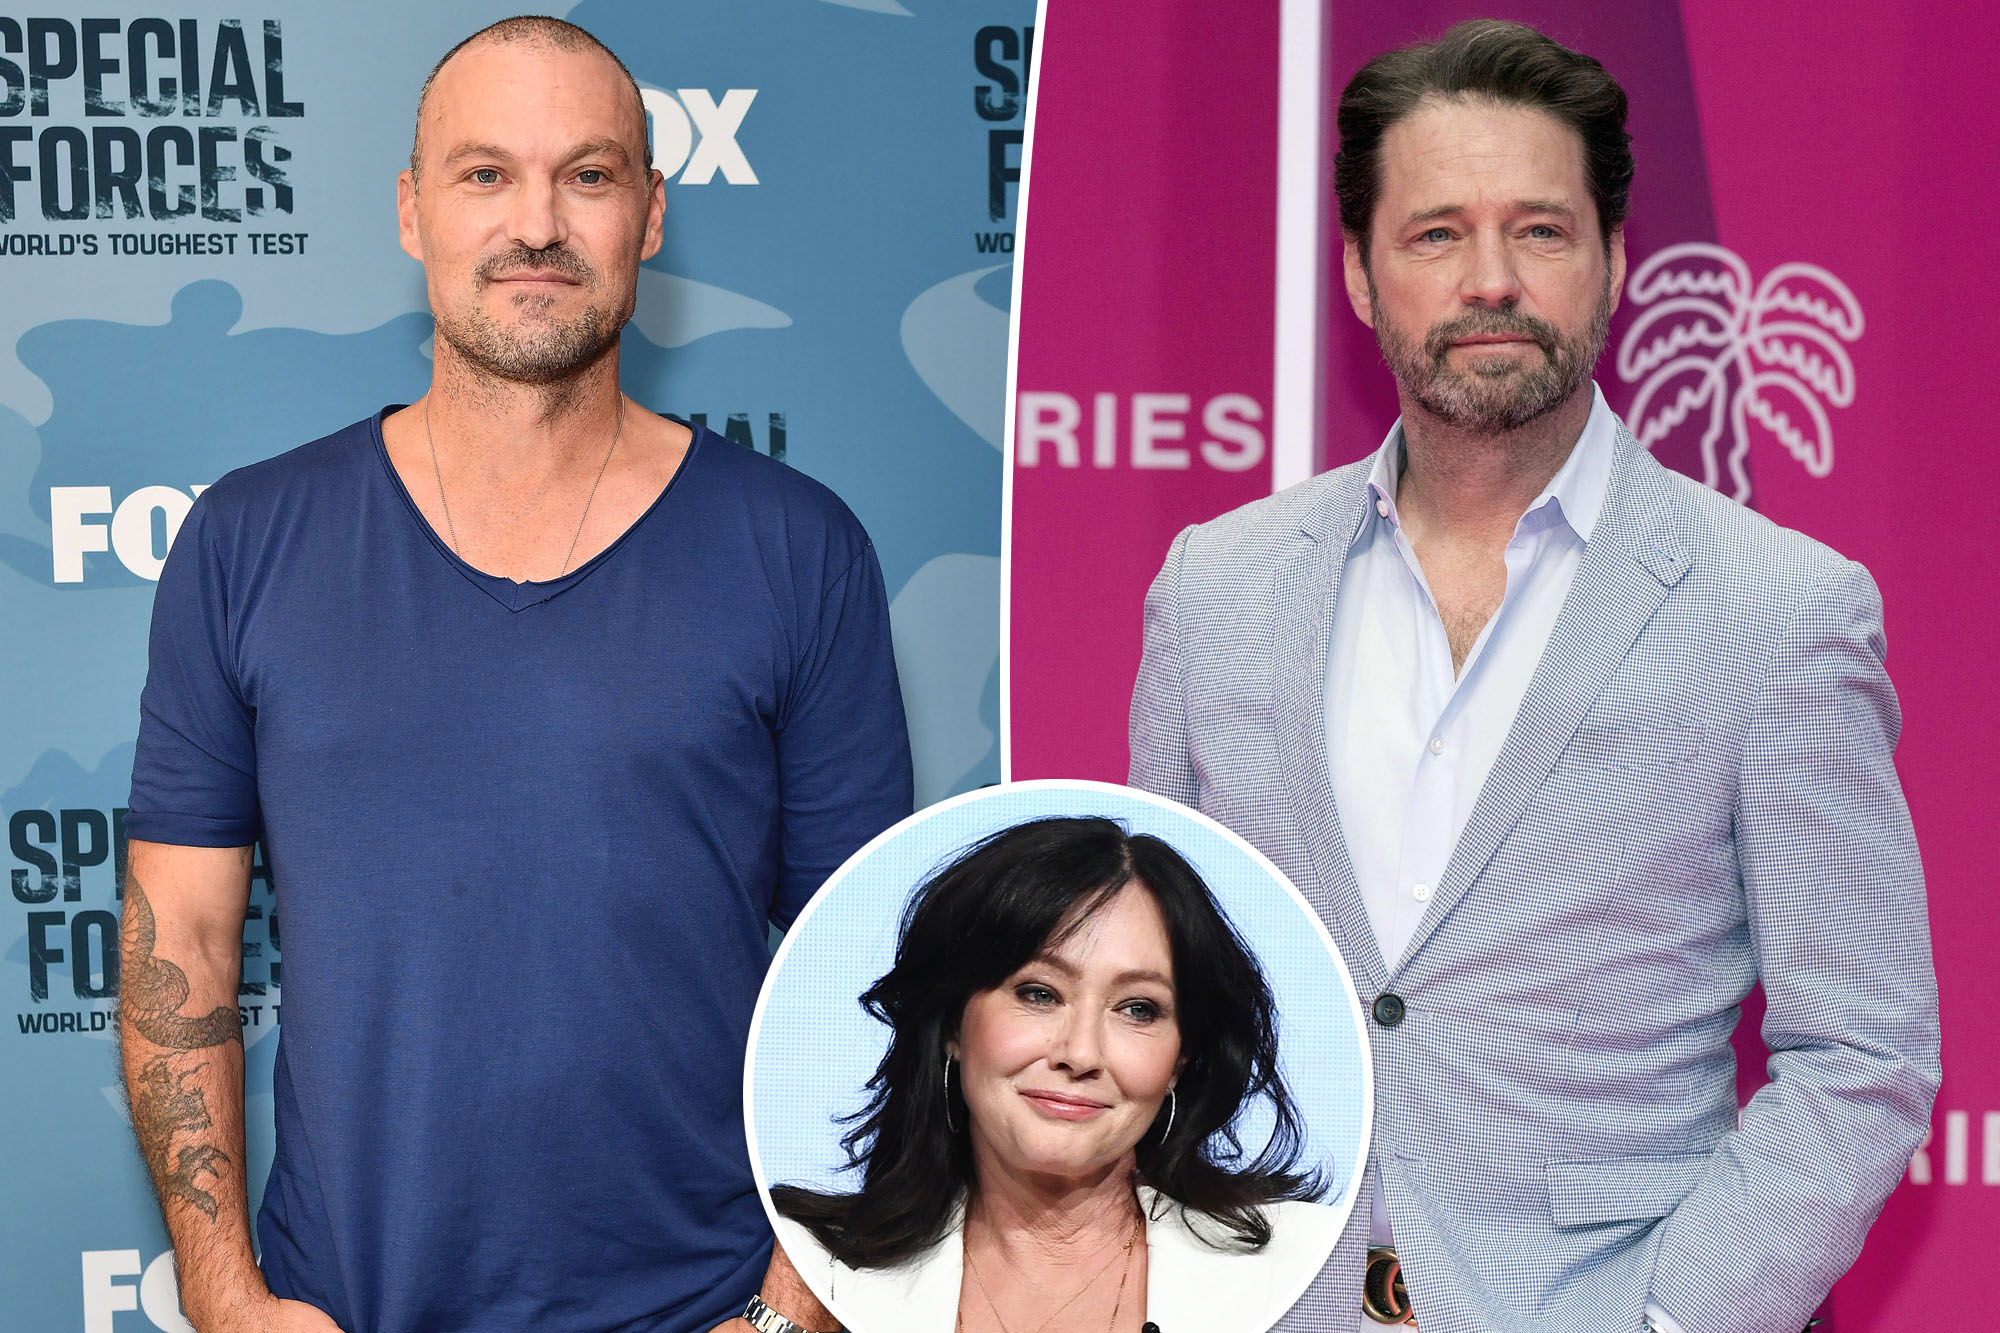 Shannen Doherty's '90210' Co-Stars Pay Tribute After Her Passing: Heartfelt Messages and Fond Memories